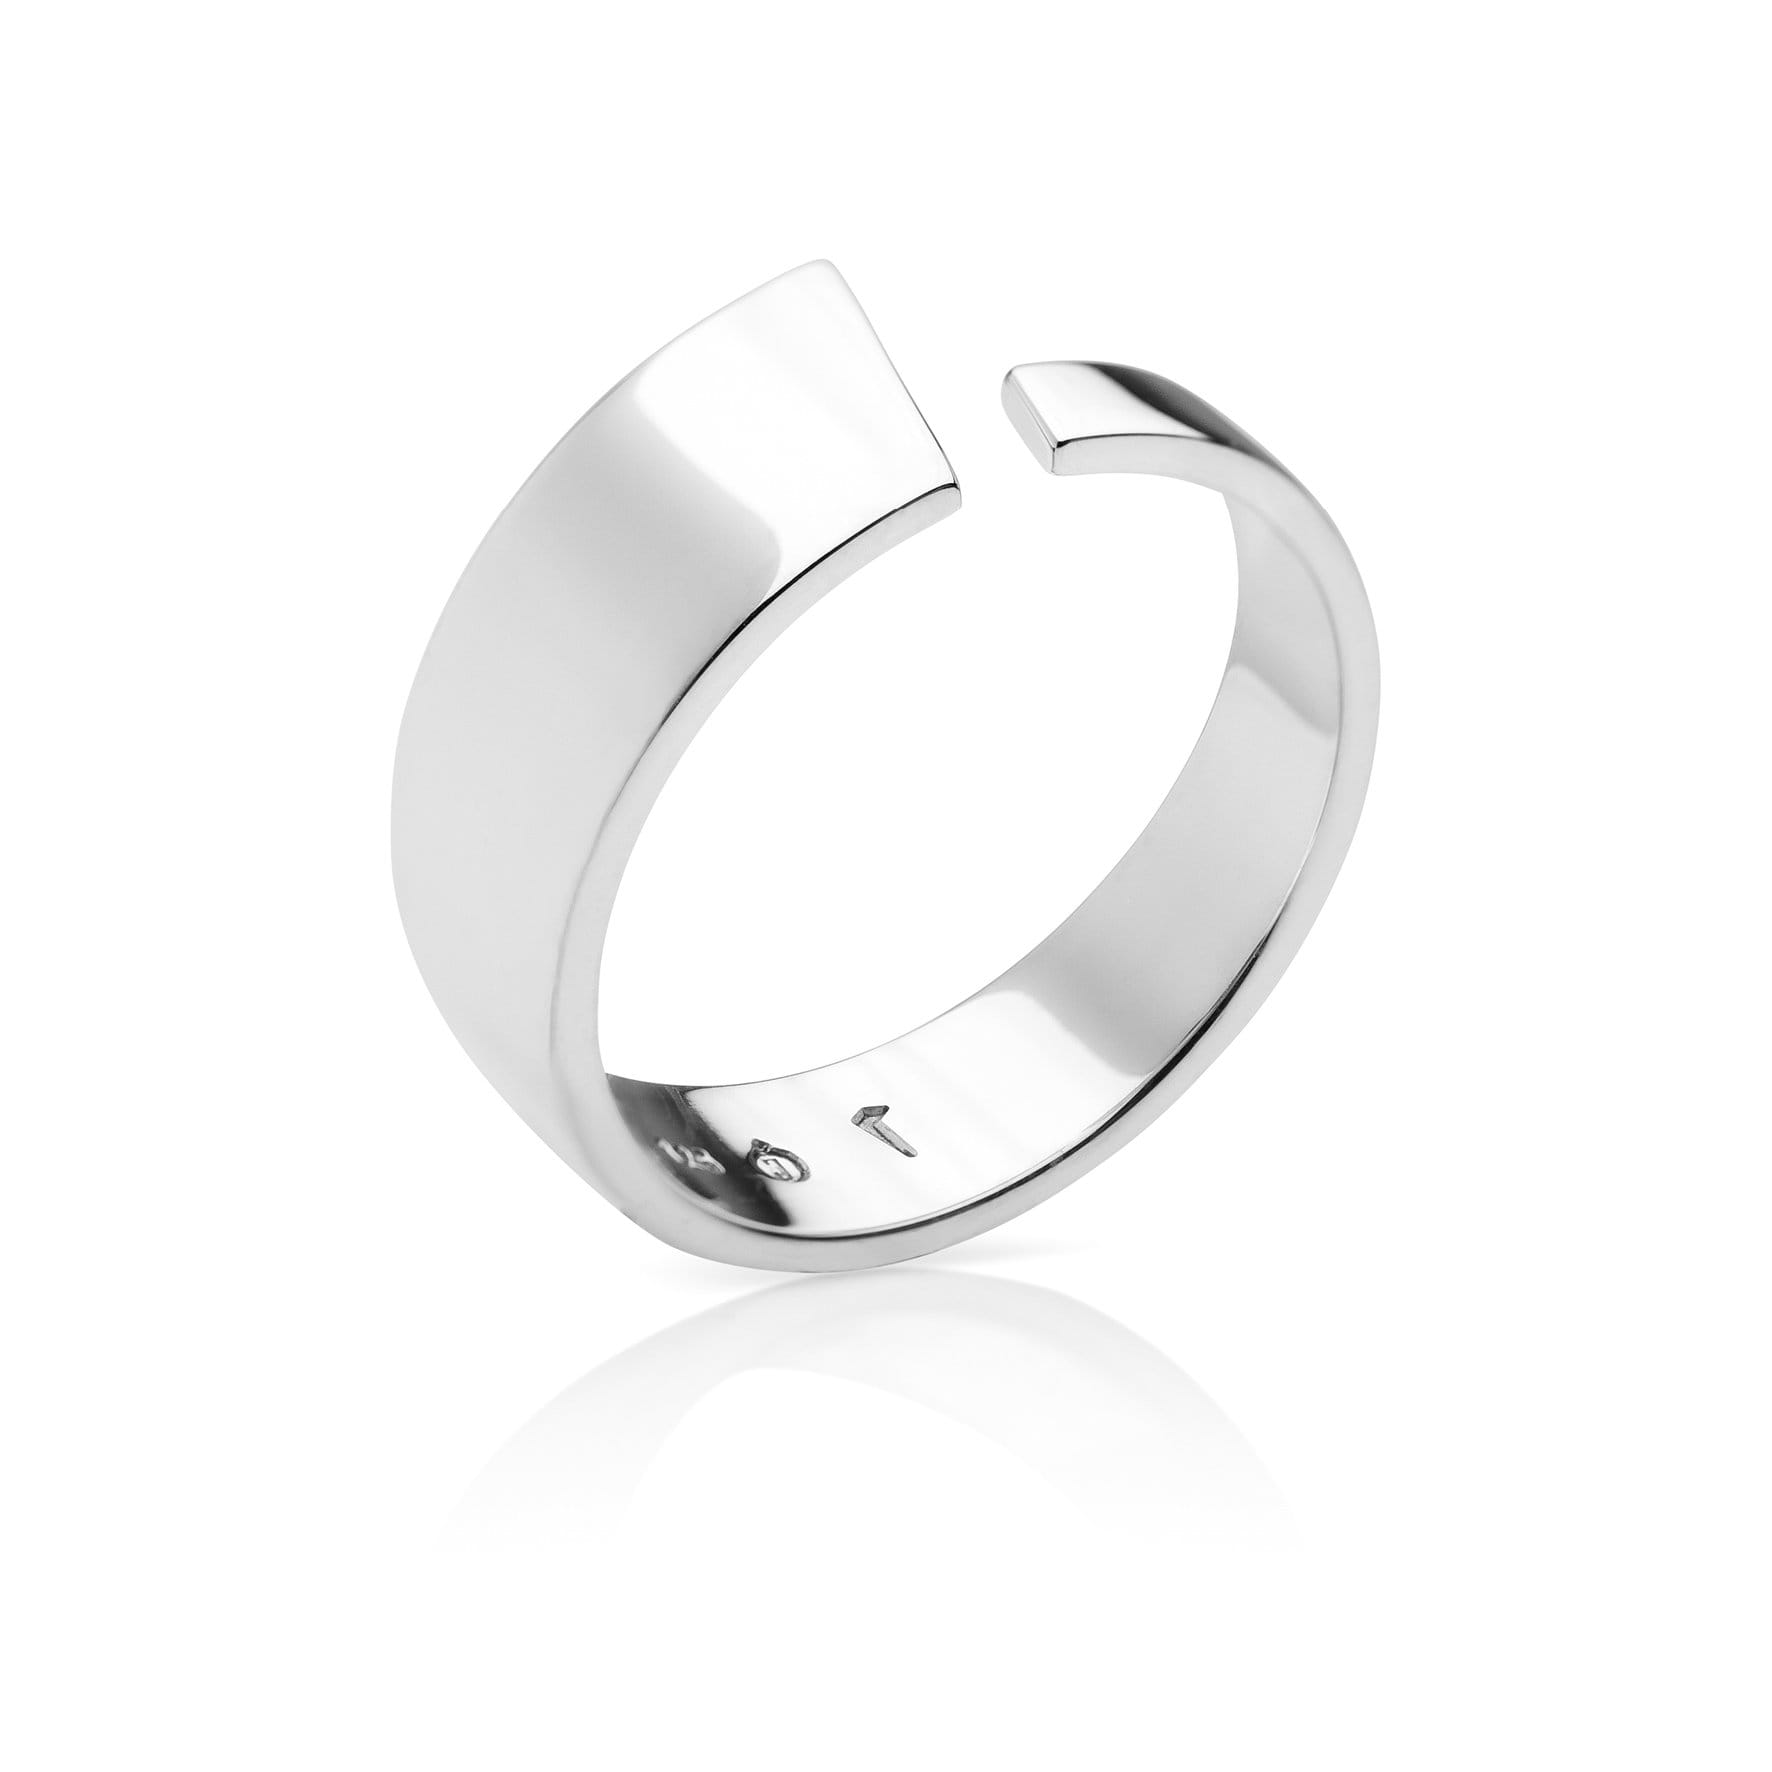 Pulpit Rock ring in glossy silver